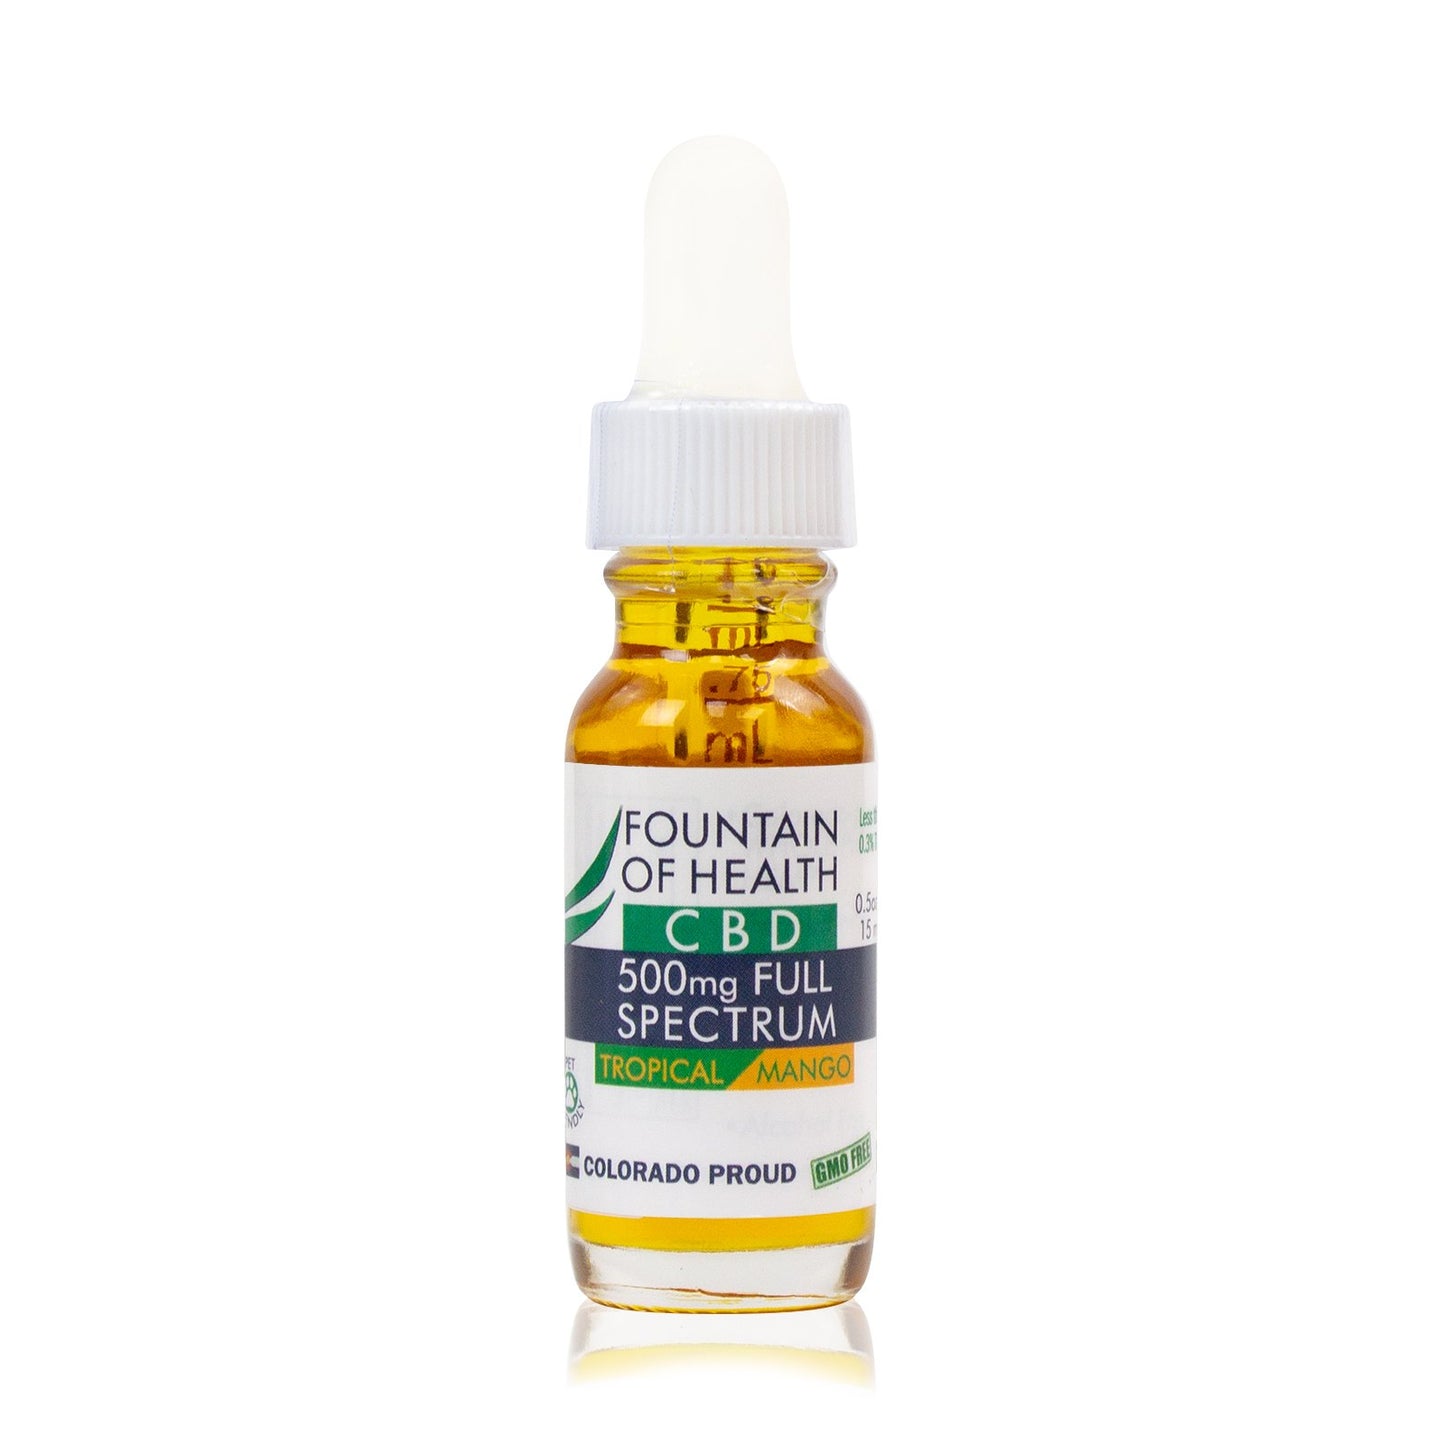 CBD Oil 500mg, Tropical Mango, 0.5 Ounce, Clearance, Exp 5/2021, 50% OFF at checkout